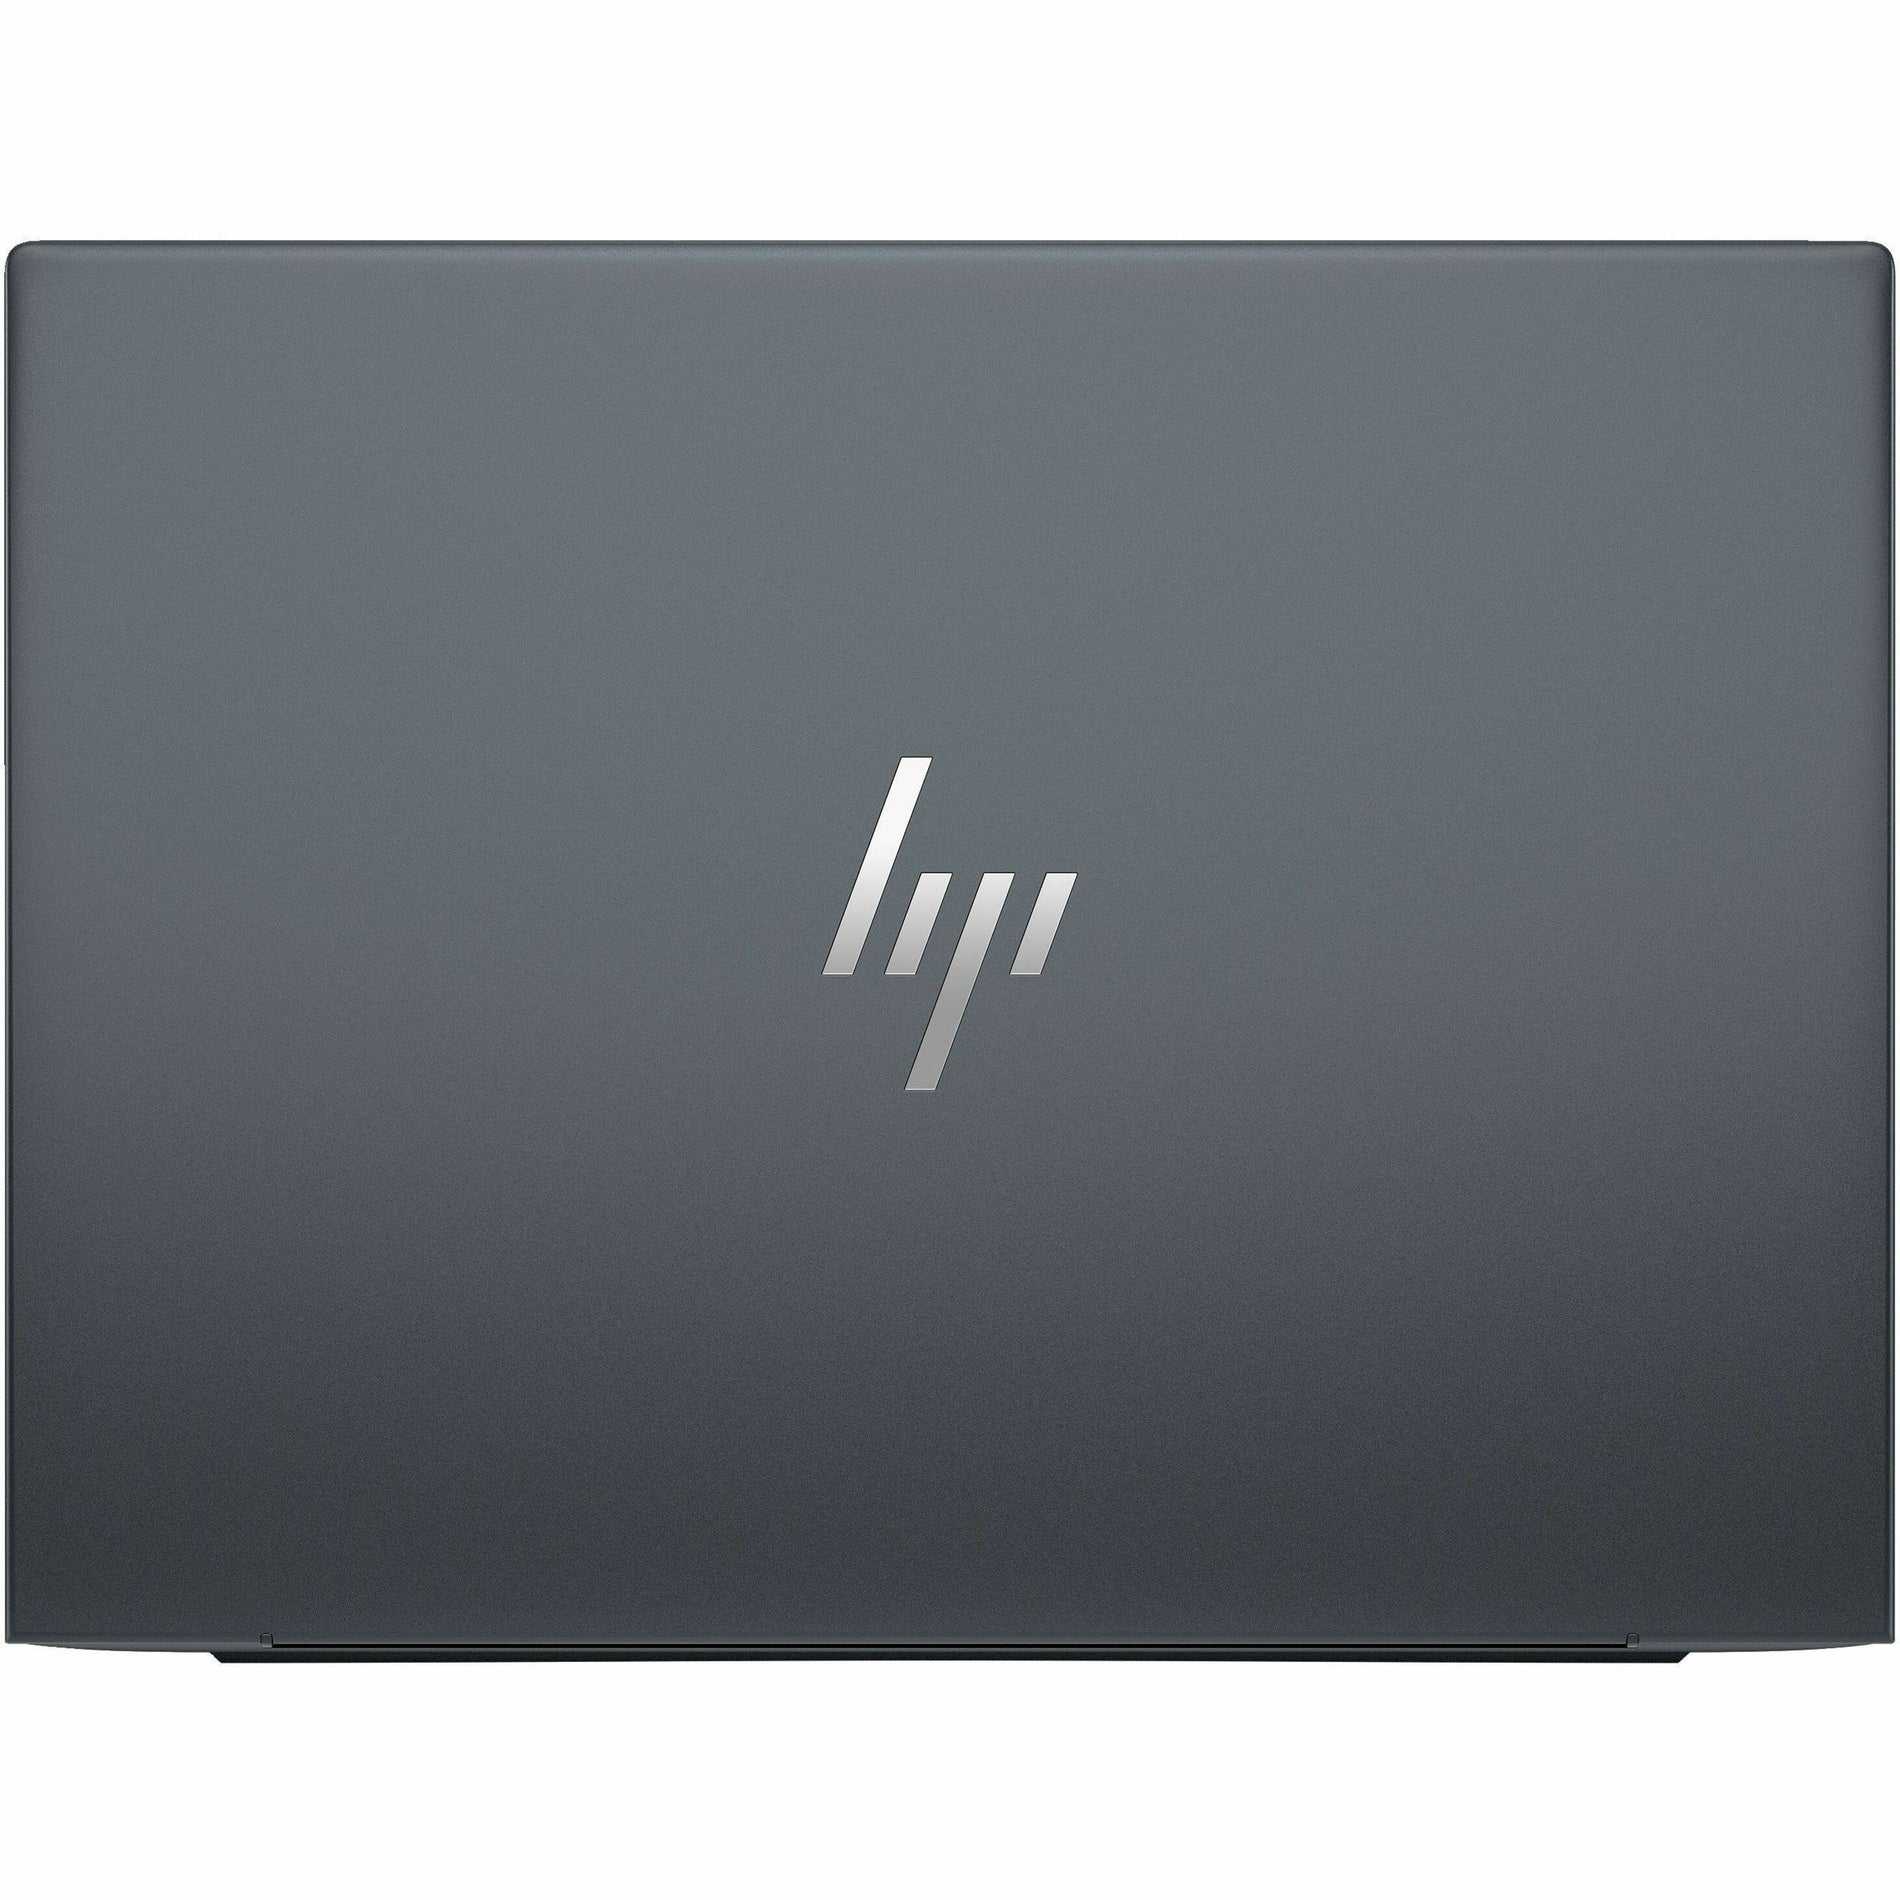 HP Dragonfly 13.5 inch G4 Notebook PC Wolf Pro Security Edition, Intel Core i7, 16GB RAM, 512GB SSD, Windows 11 Pro